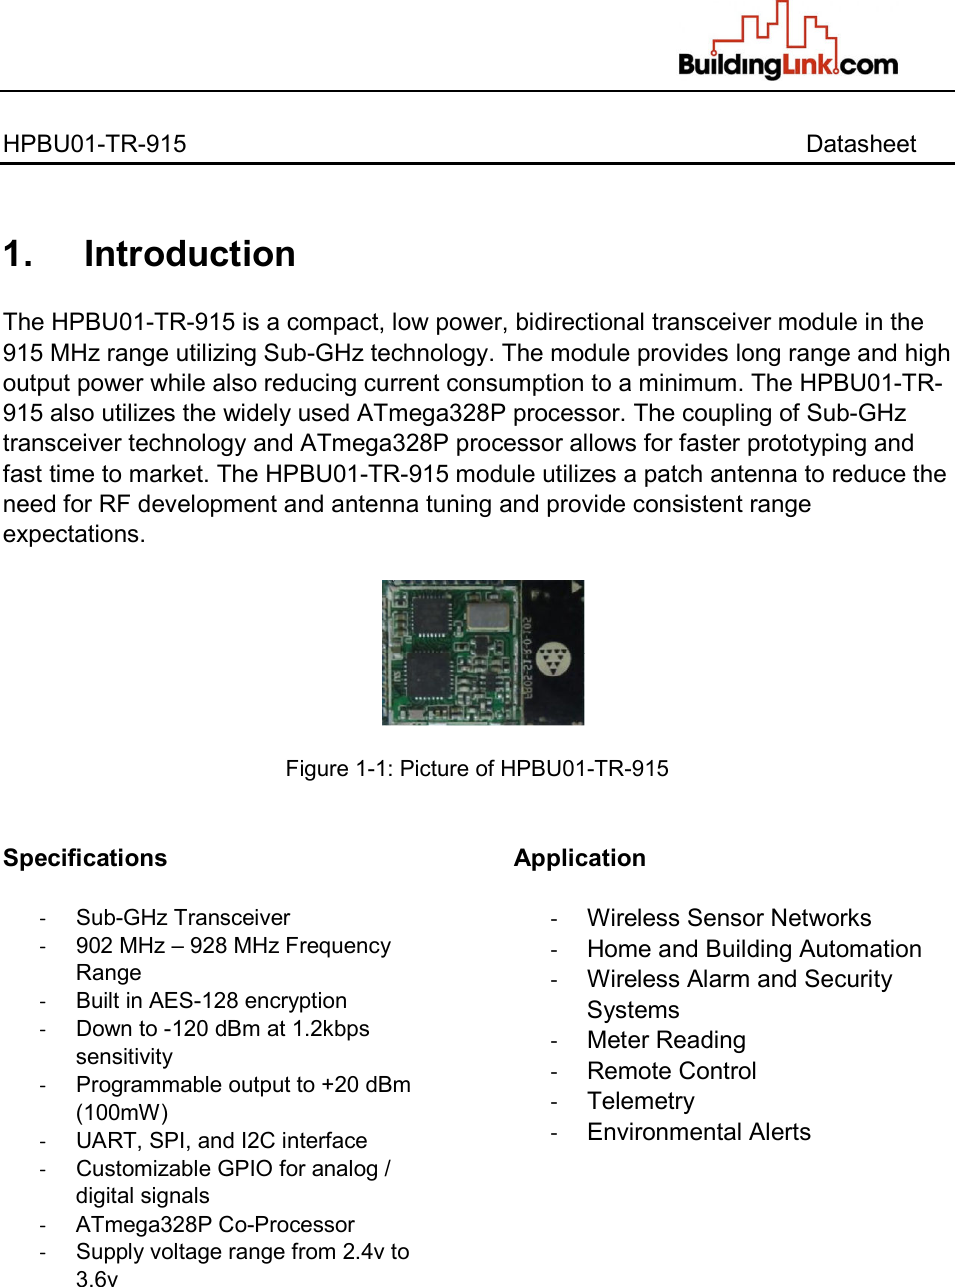   HPBU01-TR-915                  Datasheet   1.     Introduction  The HPBU01-TR-915 is a compact, low power, bidirectional transceiver module in the 915 MHz range utilizing Sub-GHz technology. The module provides long range and high output power while also reducing current consumption to a minimum. The HPBU01-TR-915 also utilizes the widely used ATmega328P processor. The coupling of Sub-GHz transceiver technology and ATmega328P processor allows for faster prototyping and fast time to market. The HPBU01-TR-915 module utilizes a patch antenna to reduce the need for RF development and antenna tuning and provide consistent range expectations.    Figure 1-1: Picture of HPBU01-TR-915   Specifications  -  Sub-GHz Transceiver -  902 MHz – 928 MHz Frequency Range -  Built in AES-128 encryption -  Down to -120 dBm at 1.2kbps sensitivity -  Programmable output to +20 dBm  (100mW) -  UART, SPI, and I2C interface -  Customizable GPIO for analog / digital signals -  ATmega328P Co-Processor -  Supply voltage range from 2.4v to 3.6v Application  -  Wireless Sensor Networks -  Home and Building Automation -  Wireless Alarm and Security Systems -  Meter Reading  -  Remote Control -  Telemetry -  Environmental Alerts    